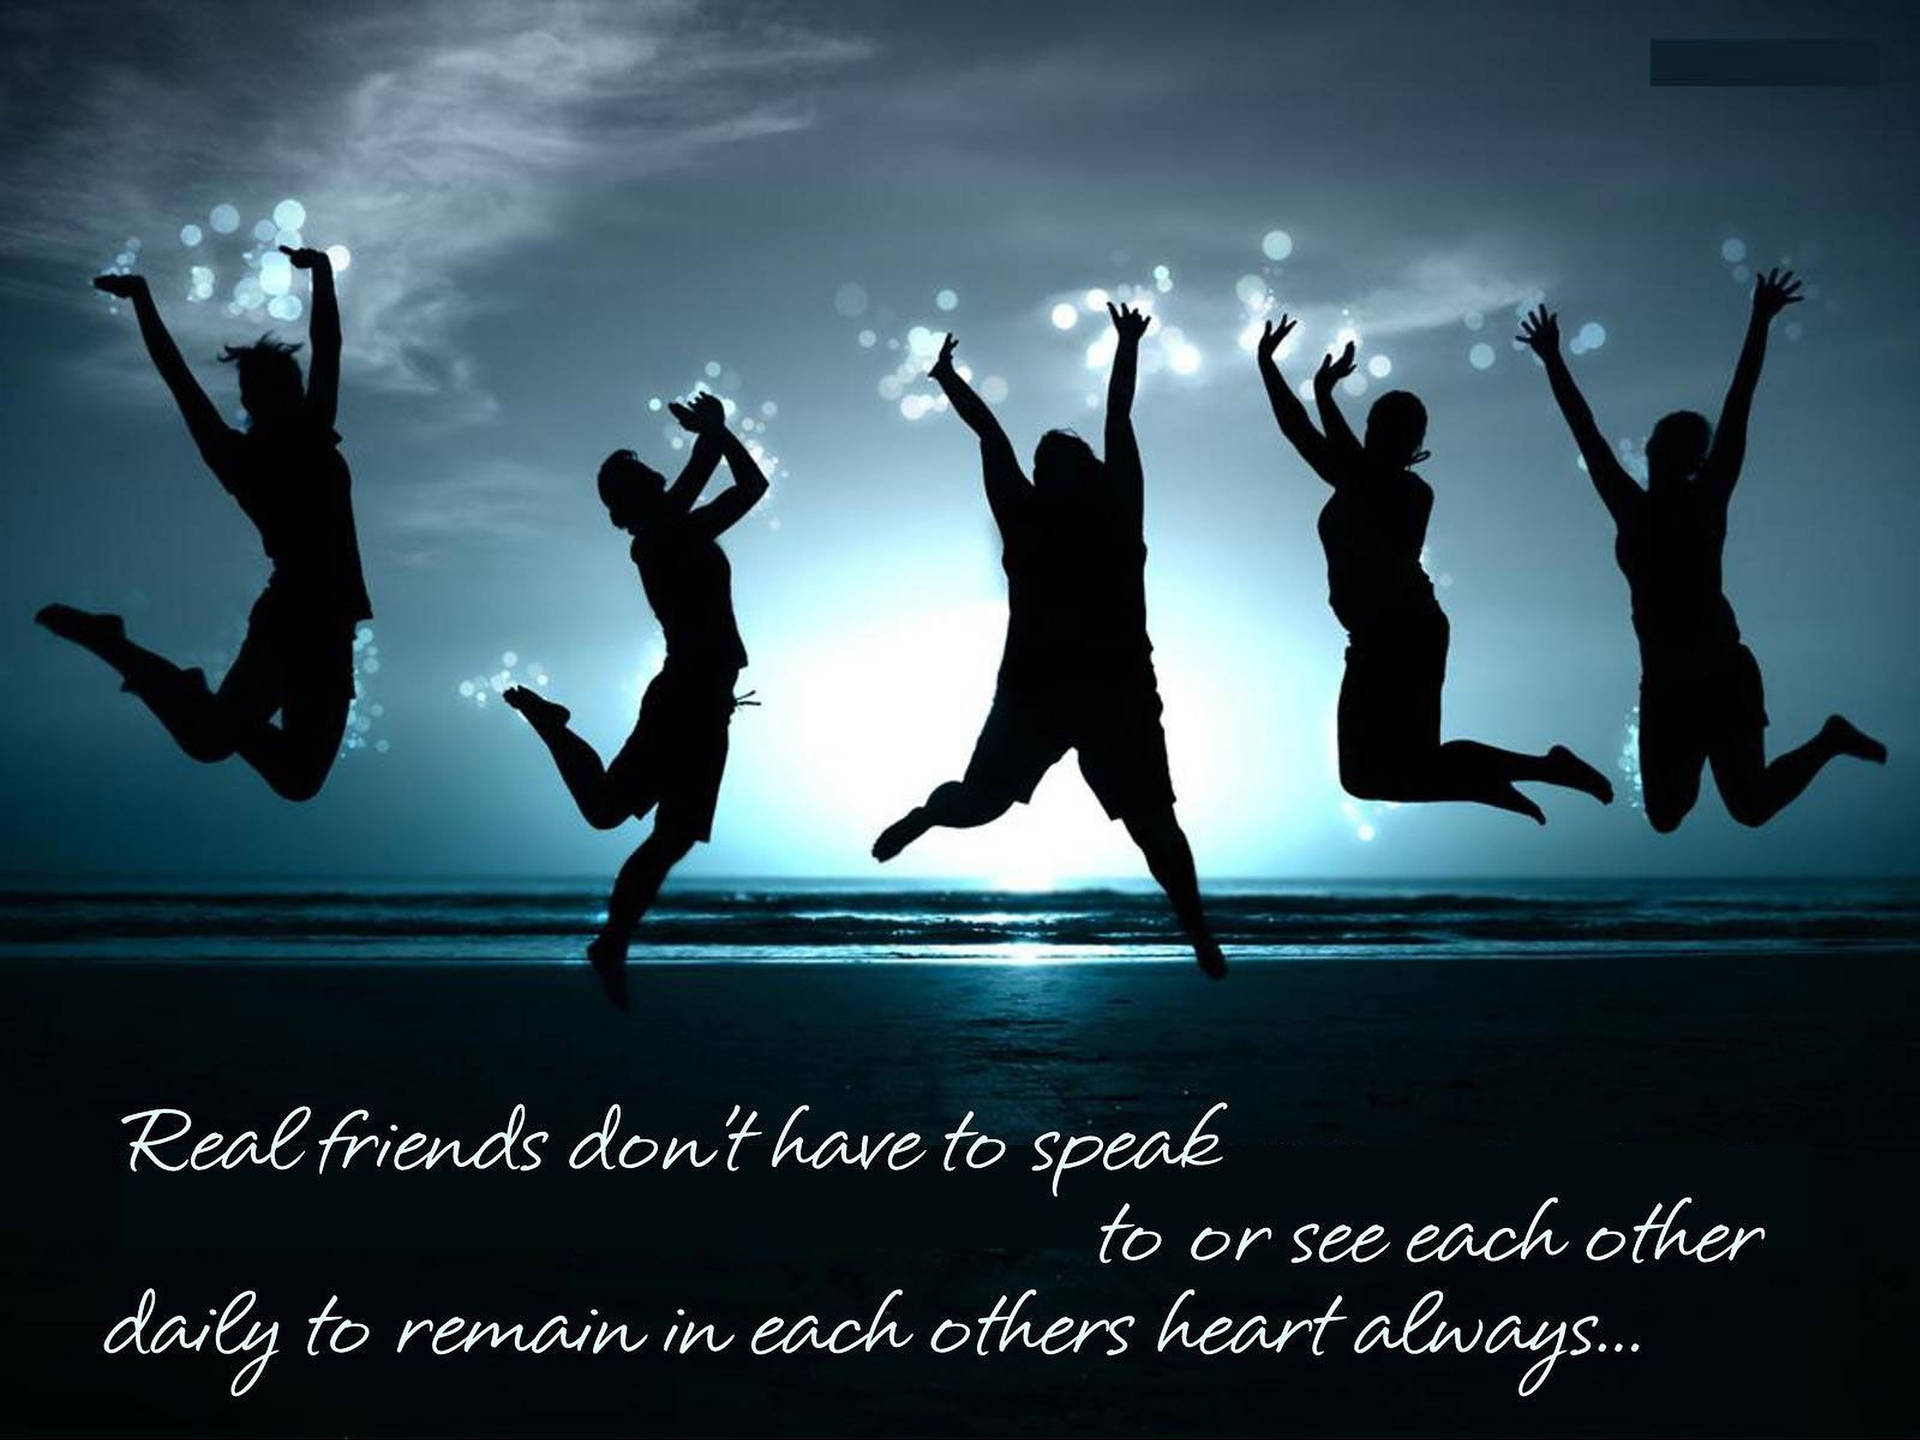 quotes about family and friends. 2010 friends family quote